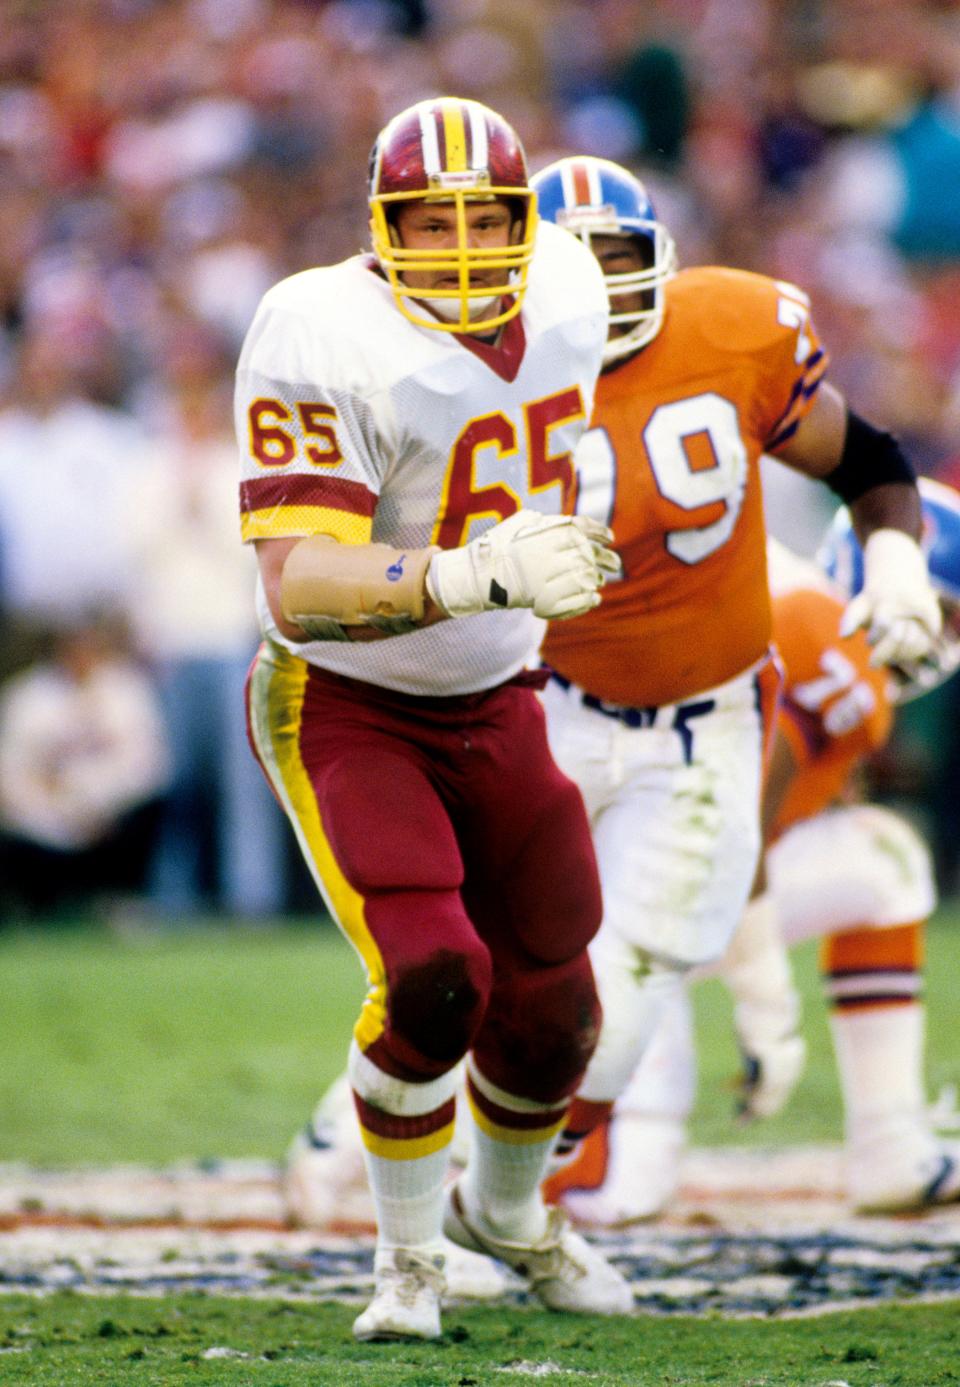 Defensive tackle Dave Butz helped Washington win two Super Bowl titles.